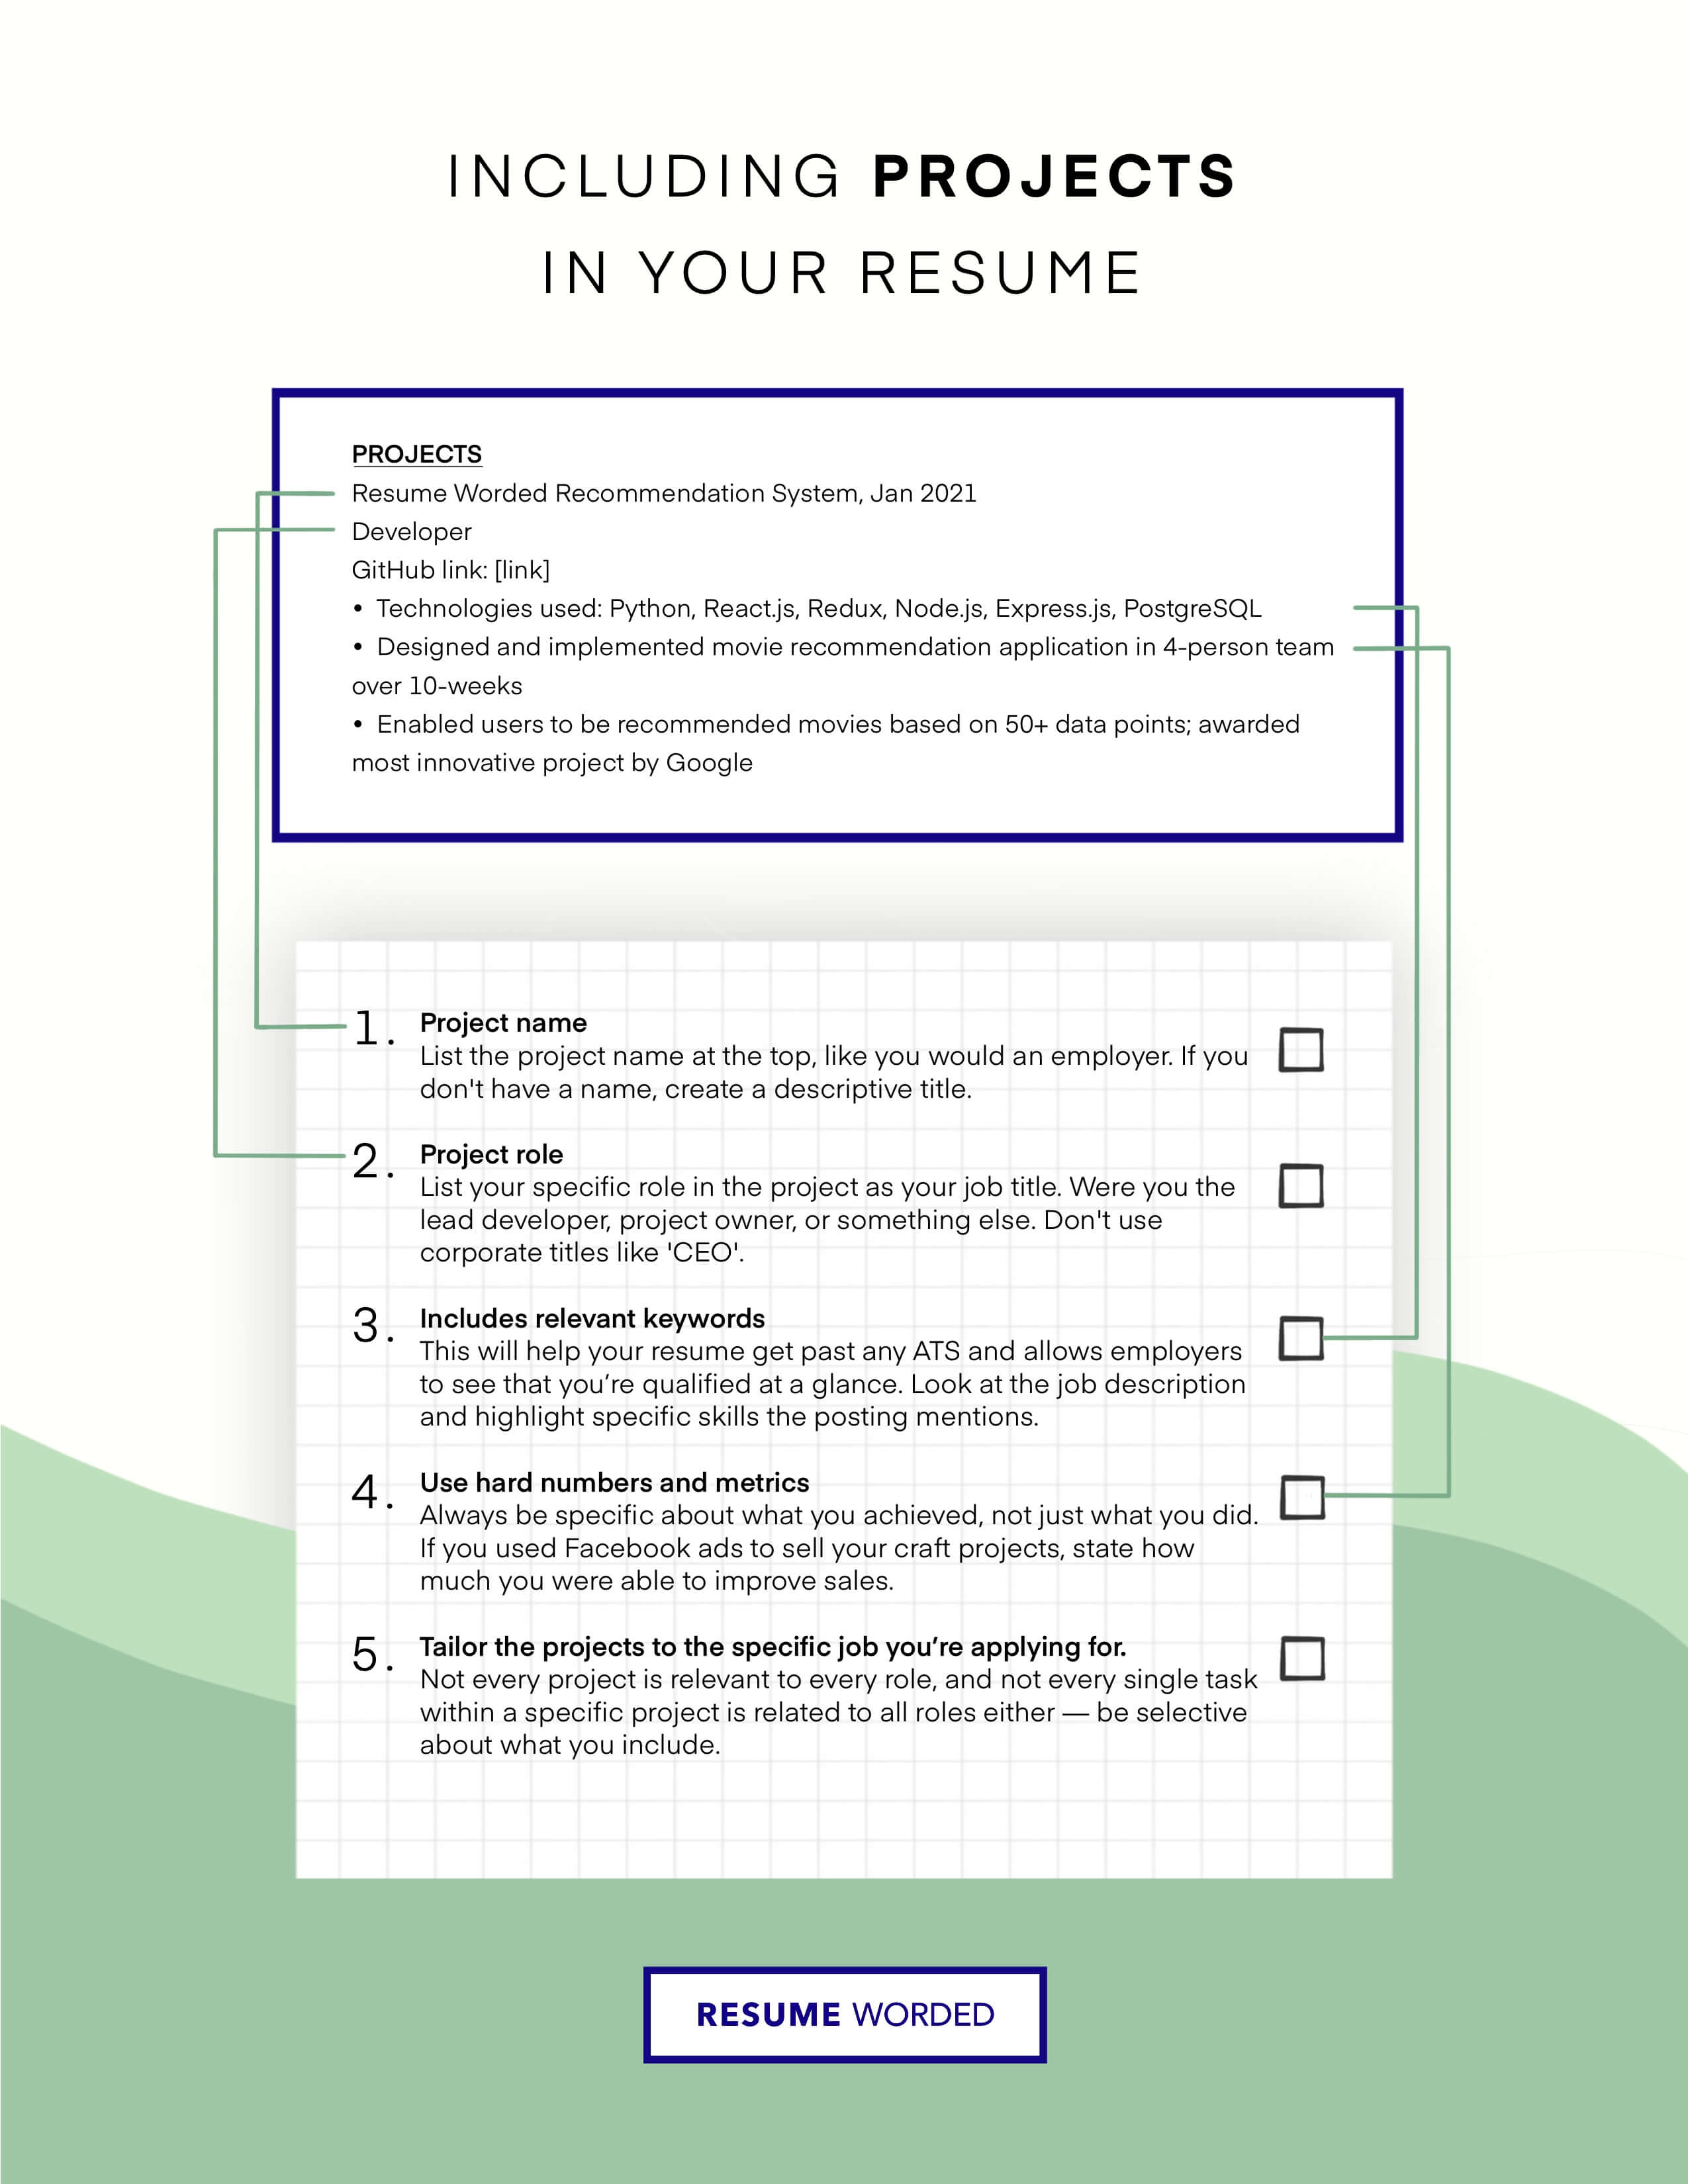 Showcase successful projects and achievements - IT Manager Resume